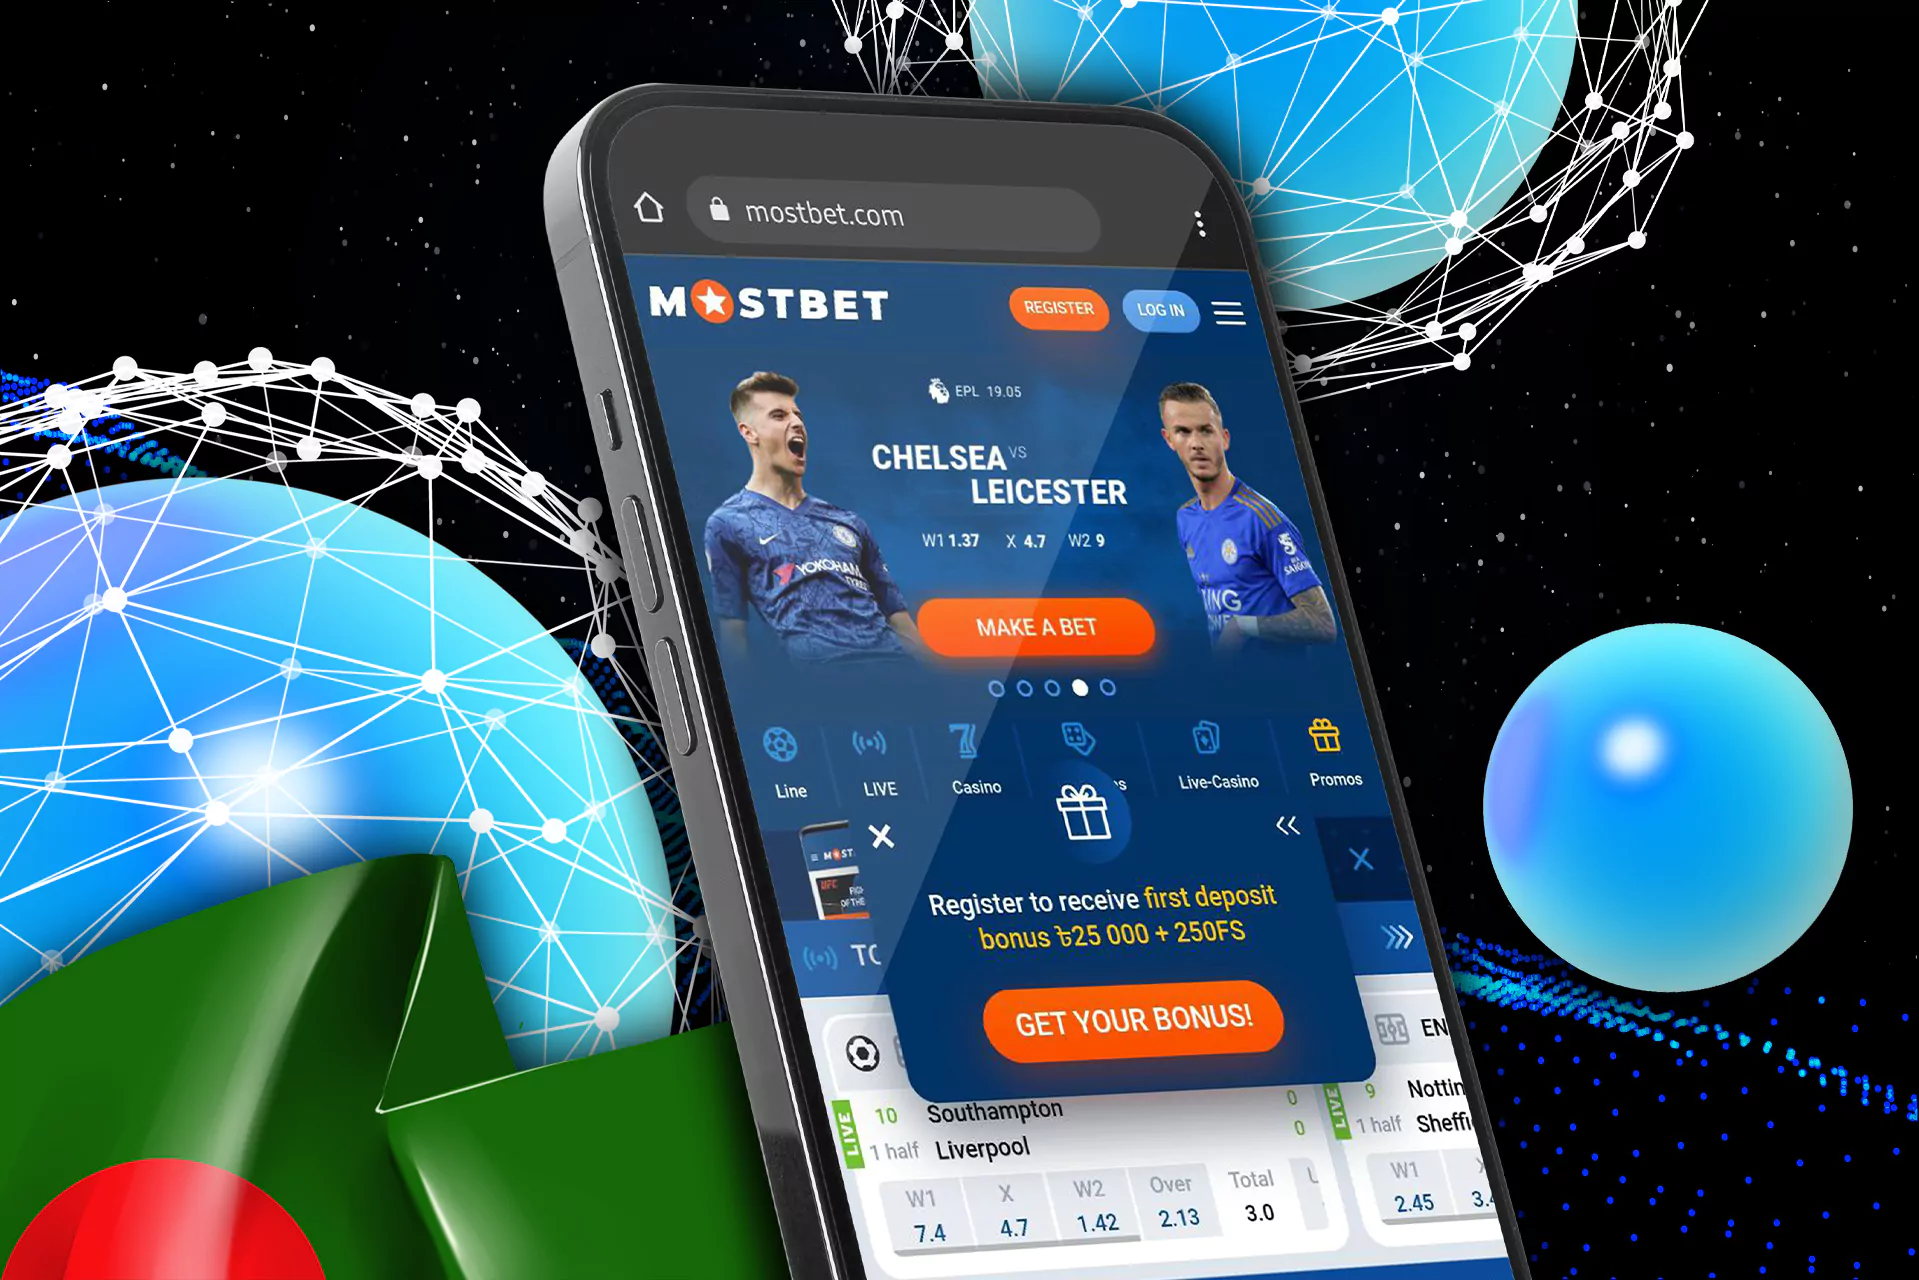 Advanced Online casino and betting company Mostbet Turkey